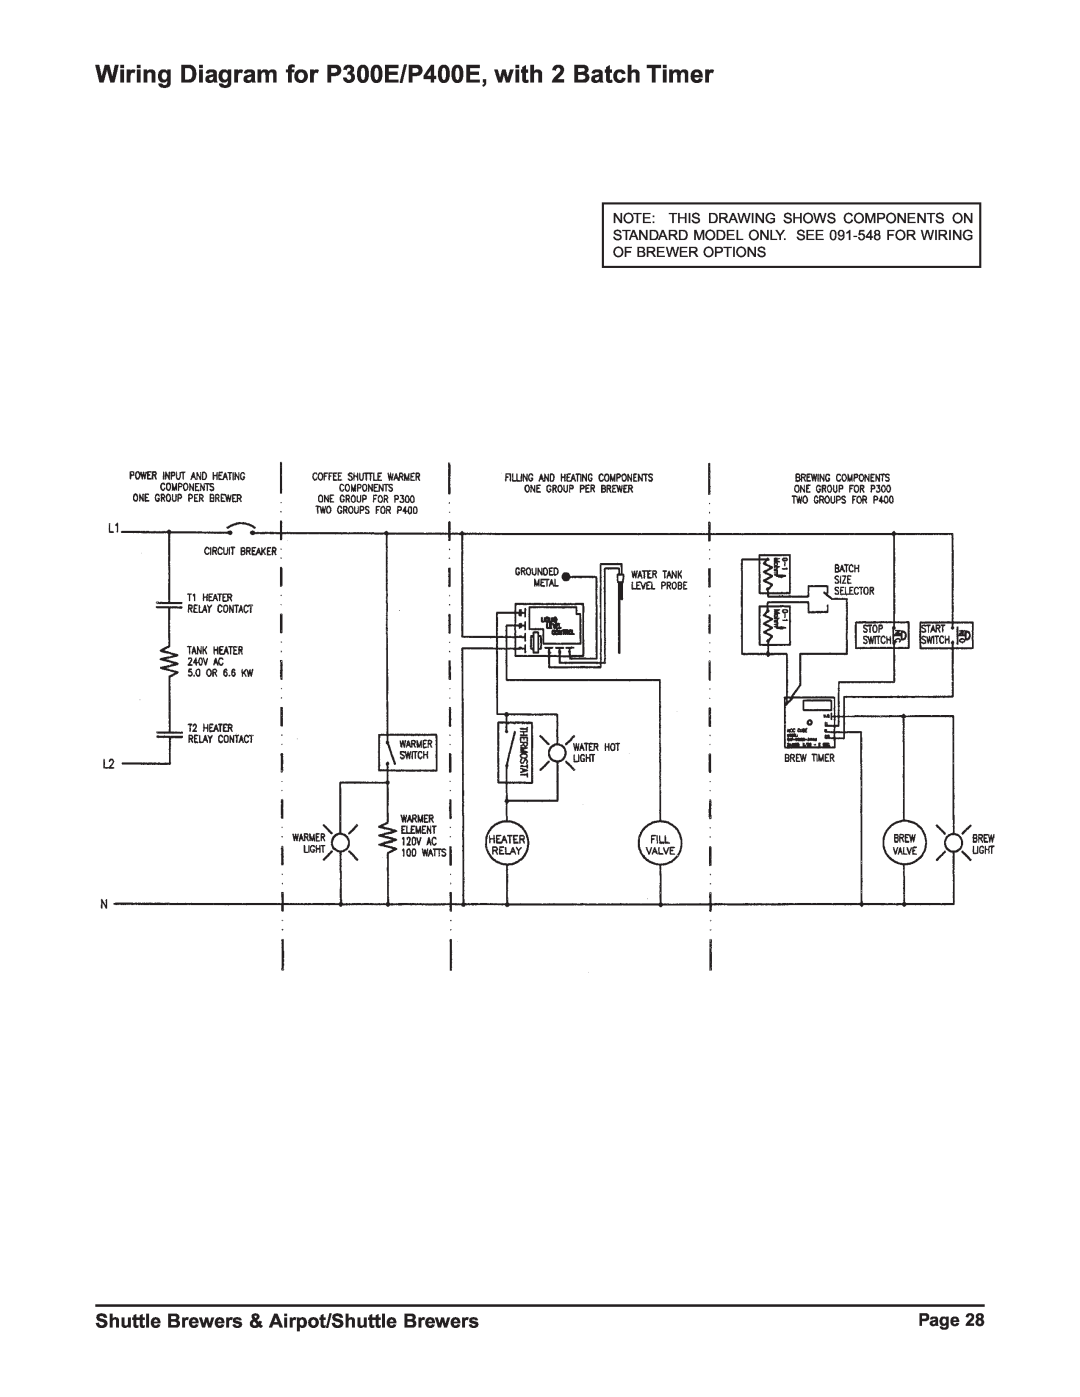 Grindmaster RAPS400E Wiring Diagram for P300E/P400E, with 2 Batch Timer, Shuttle Brewers & Airpot/Shuttle Brewers, Page 